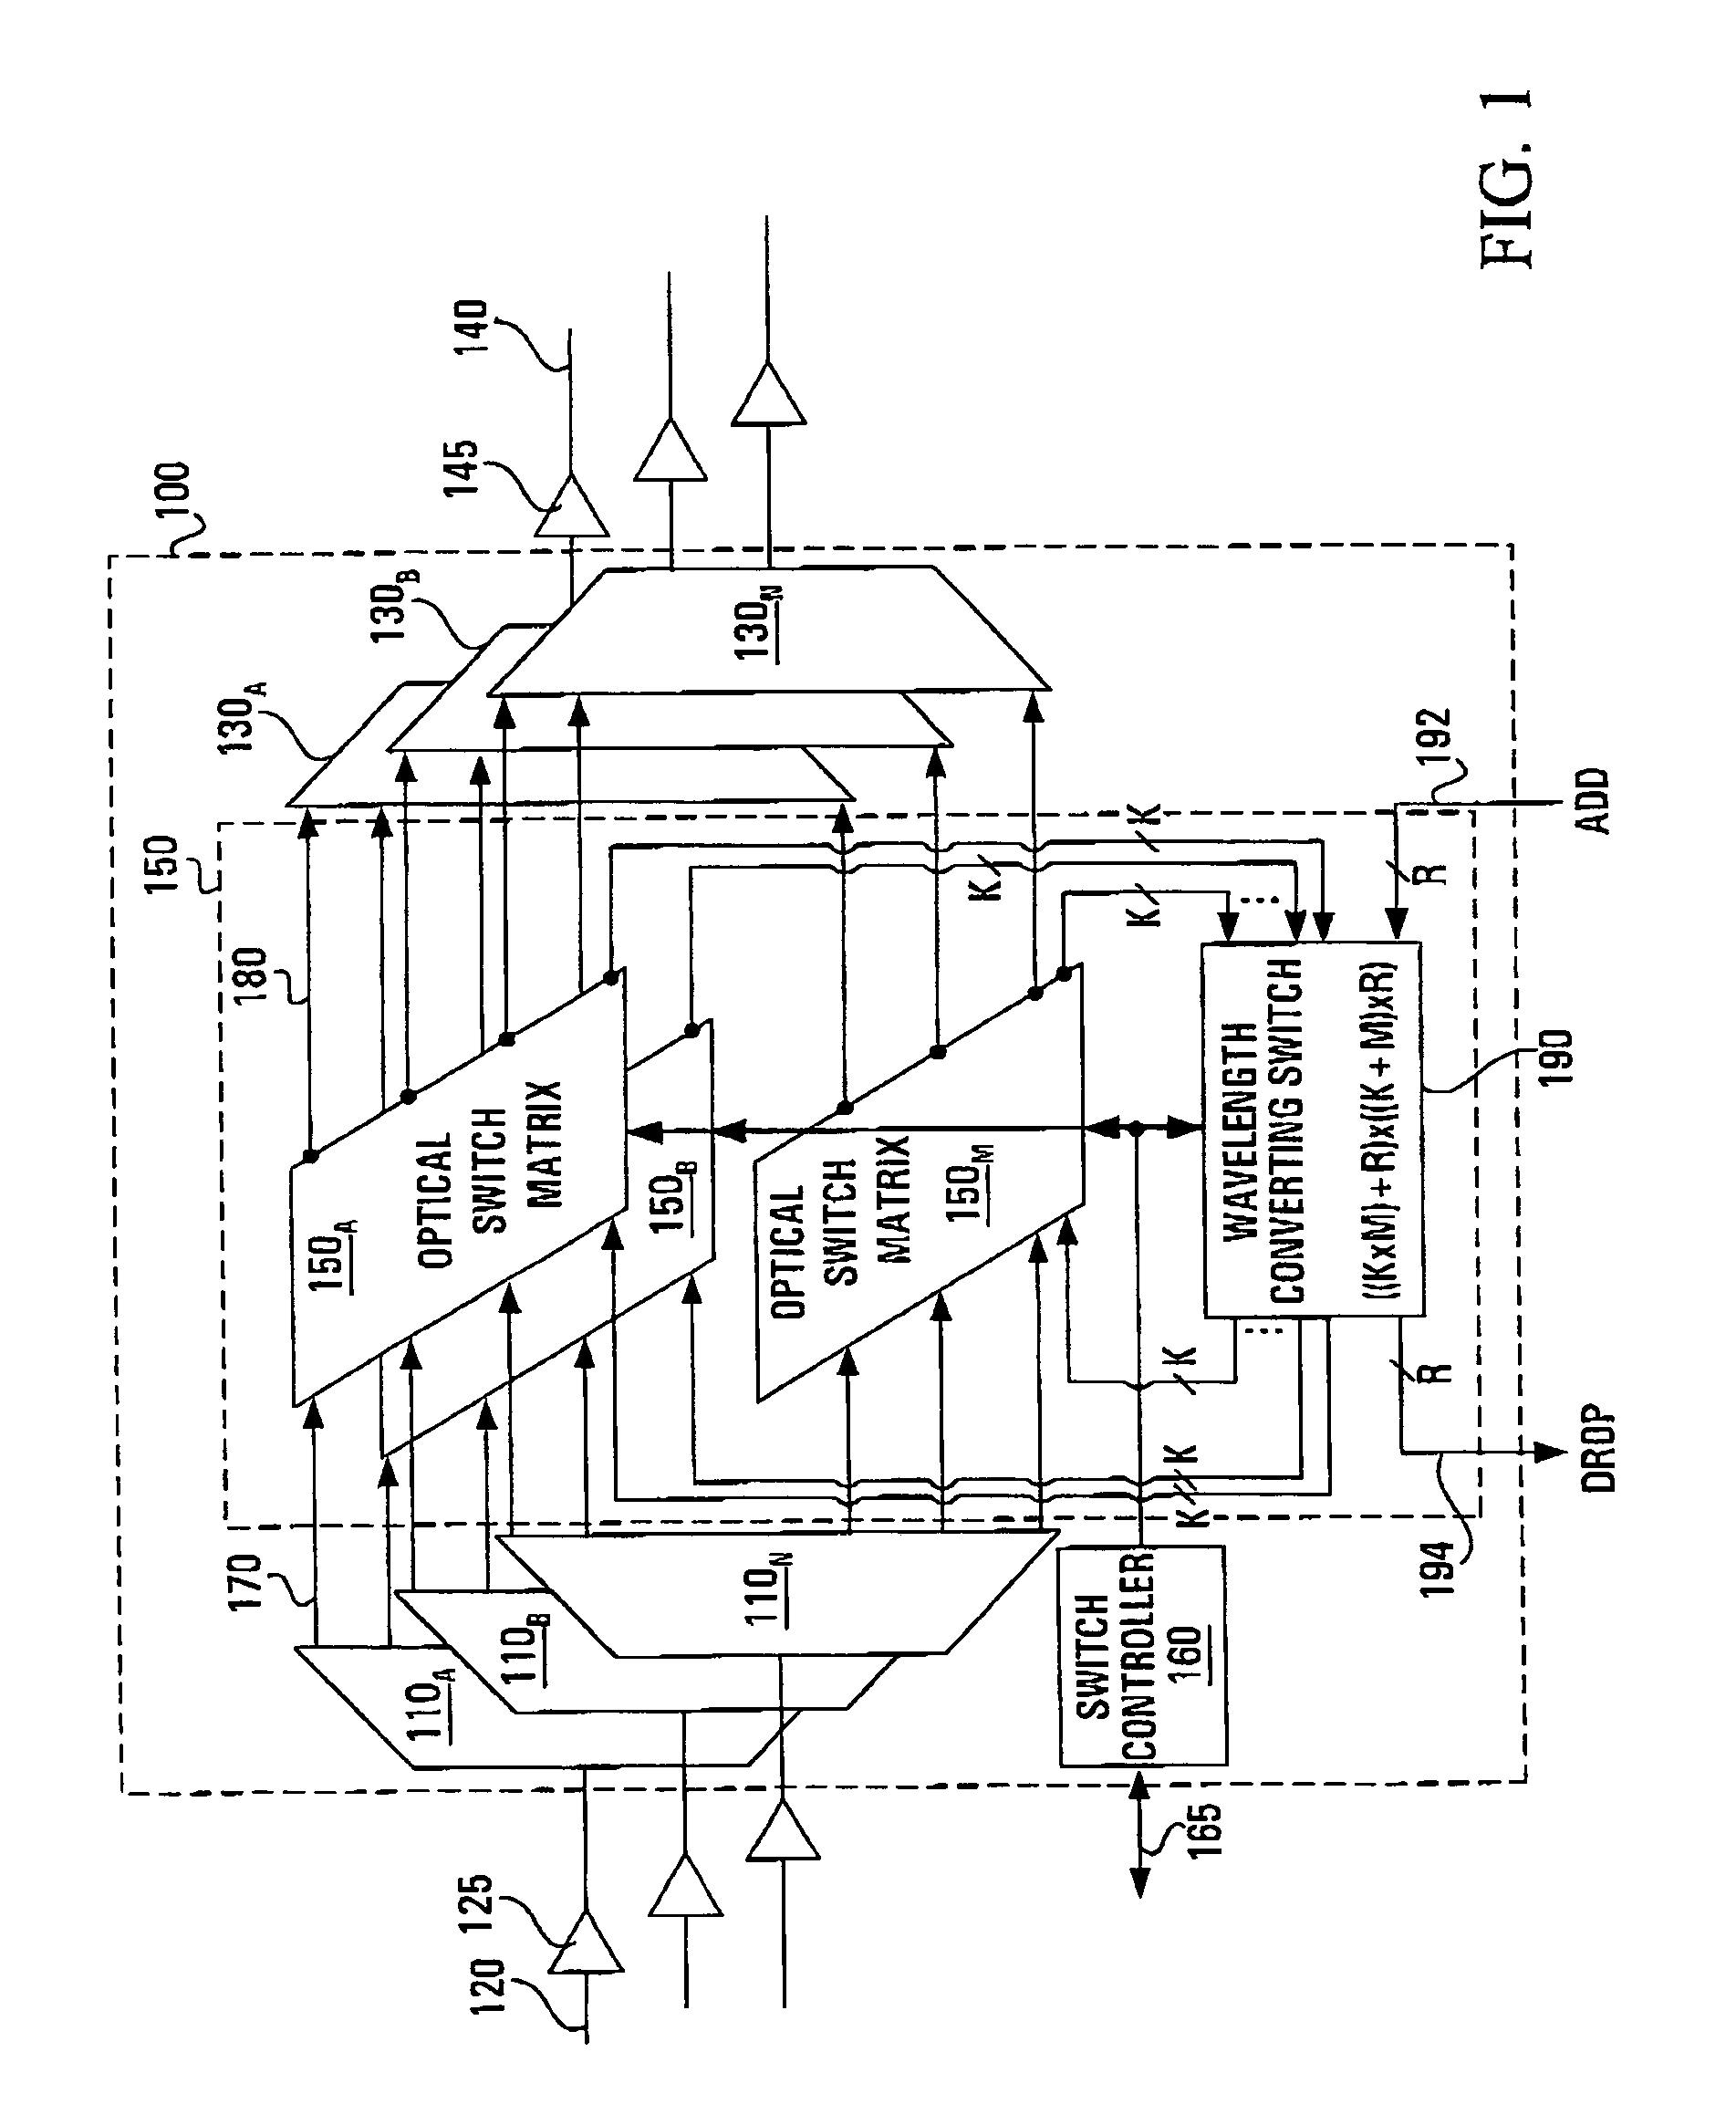 Optical switch with power equalization